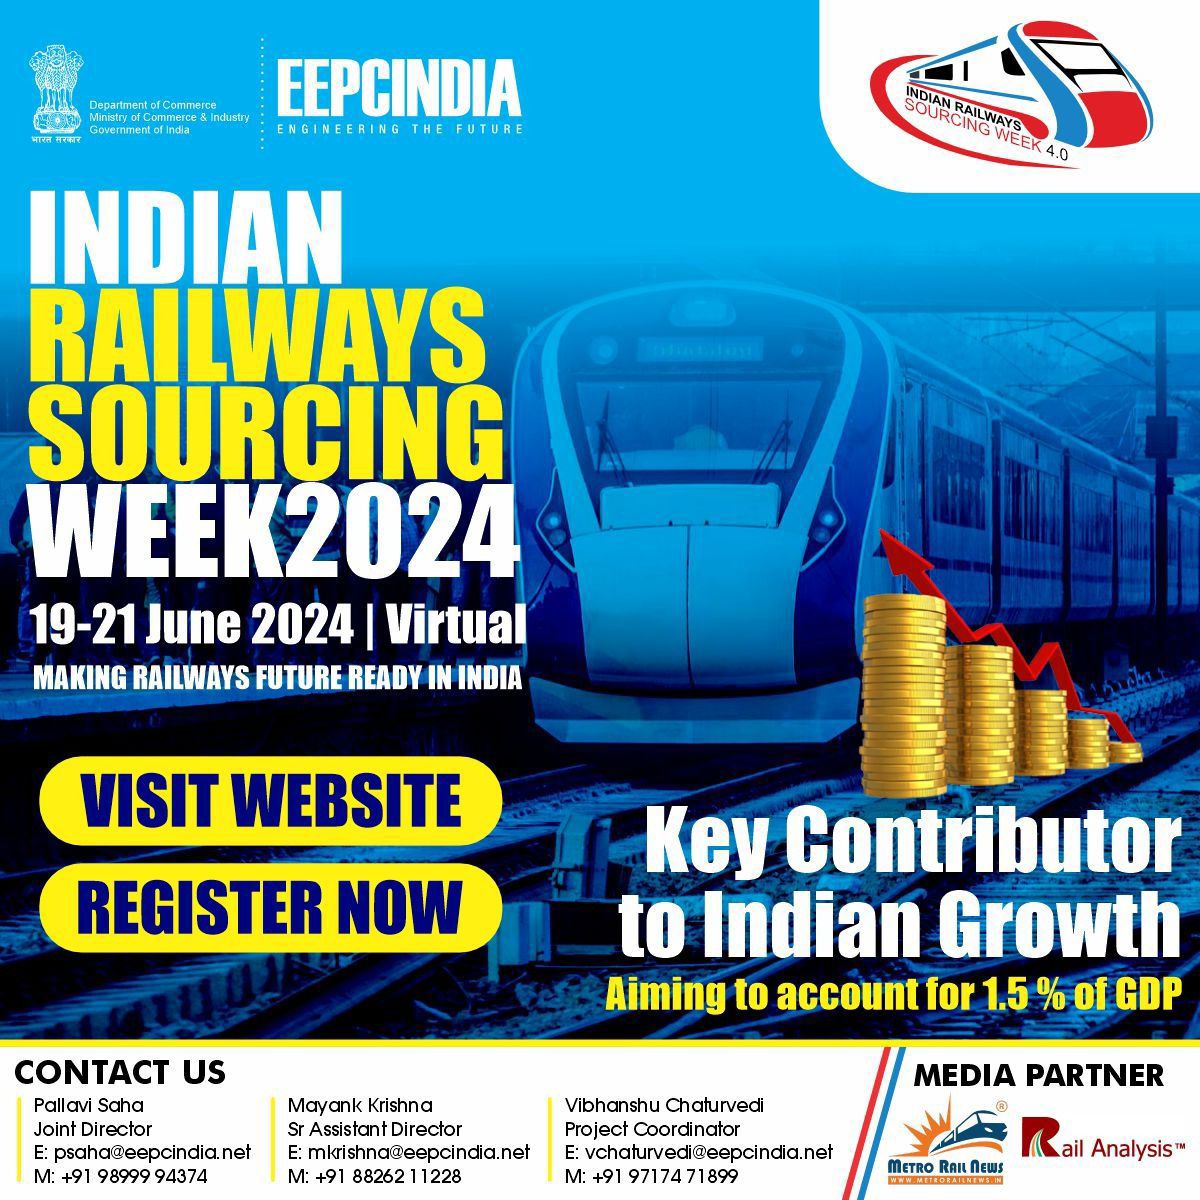 Indian Railways plan to build infrastructure to support 45 percent of the modal freight share of the economy thereby contributing substantially to GDP Find out more @ #IRSW4.0 👉Register eepcvirtualexpo.com/conference_man… 👉Navigate eepcvirtualexpo.com/railwaysourcin…